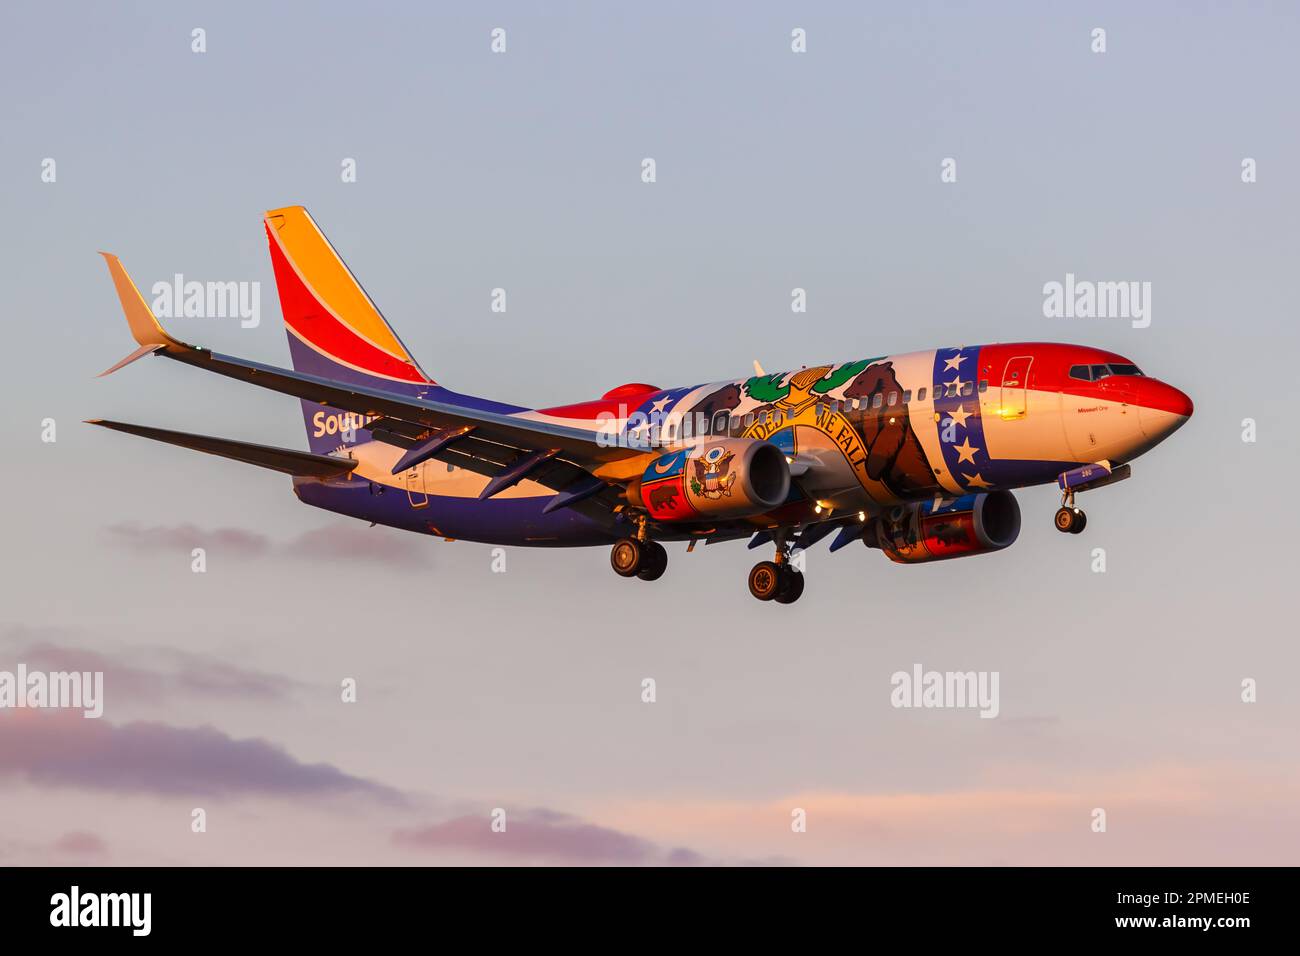 Dallas, United States – November 9, 2022: Southwest Boeing 737-700 airplane in the Missouri One special livery at Dallas Love Field airport (DAL) in t Stock Photo